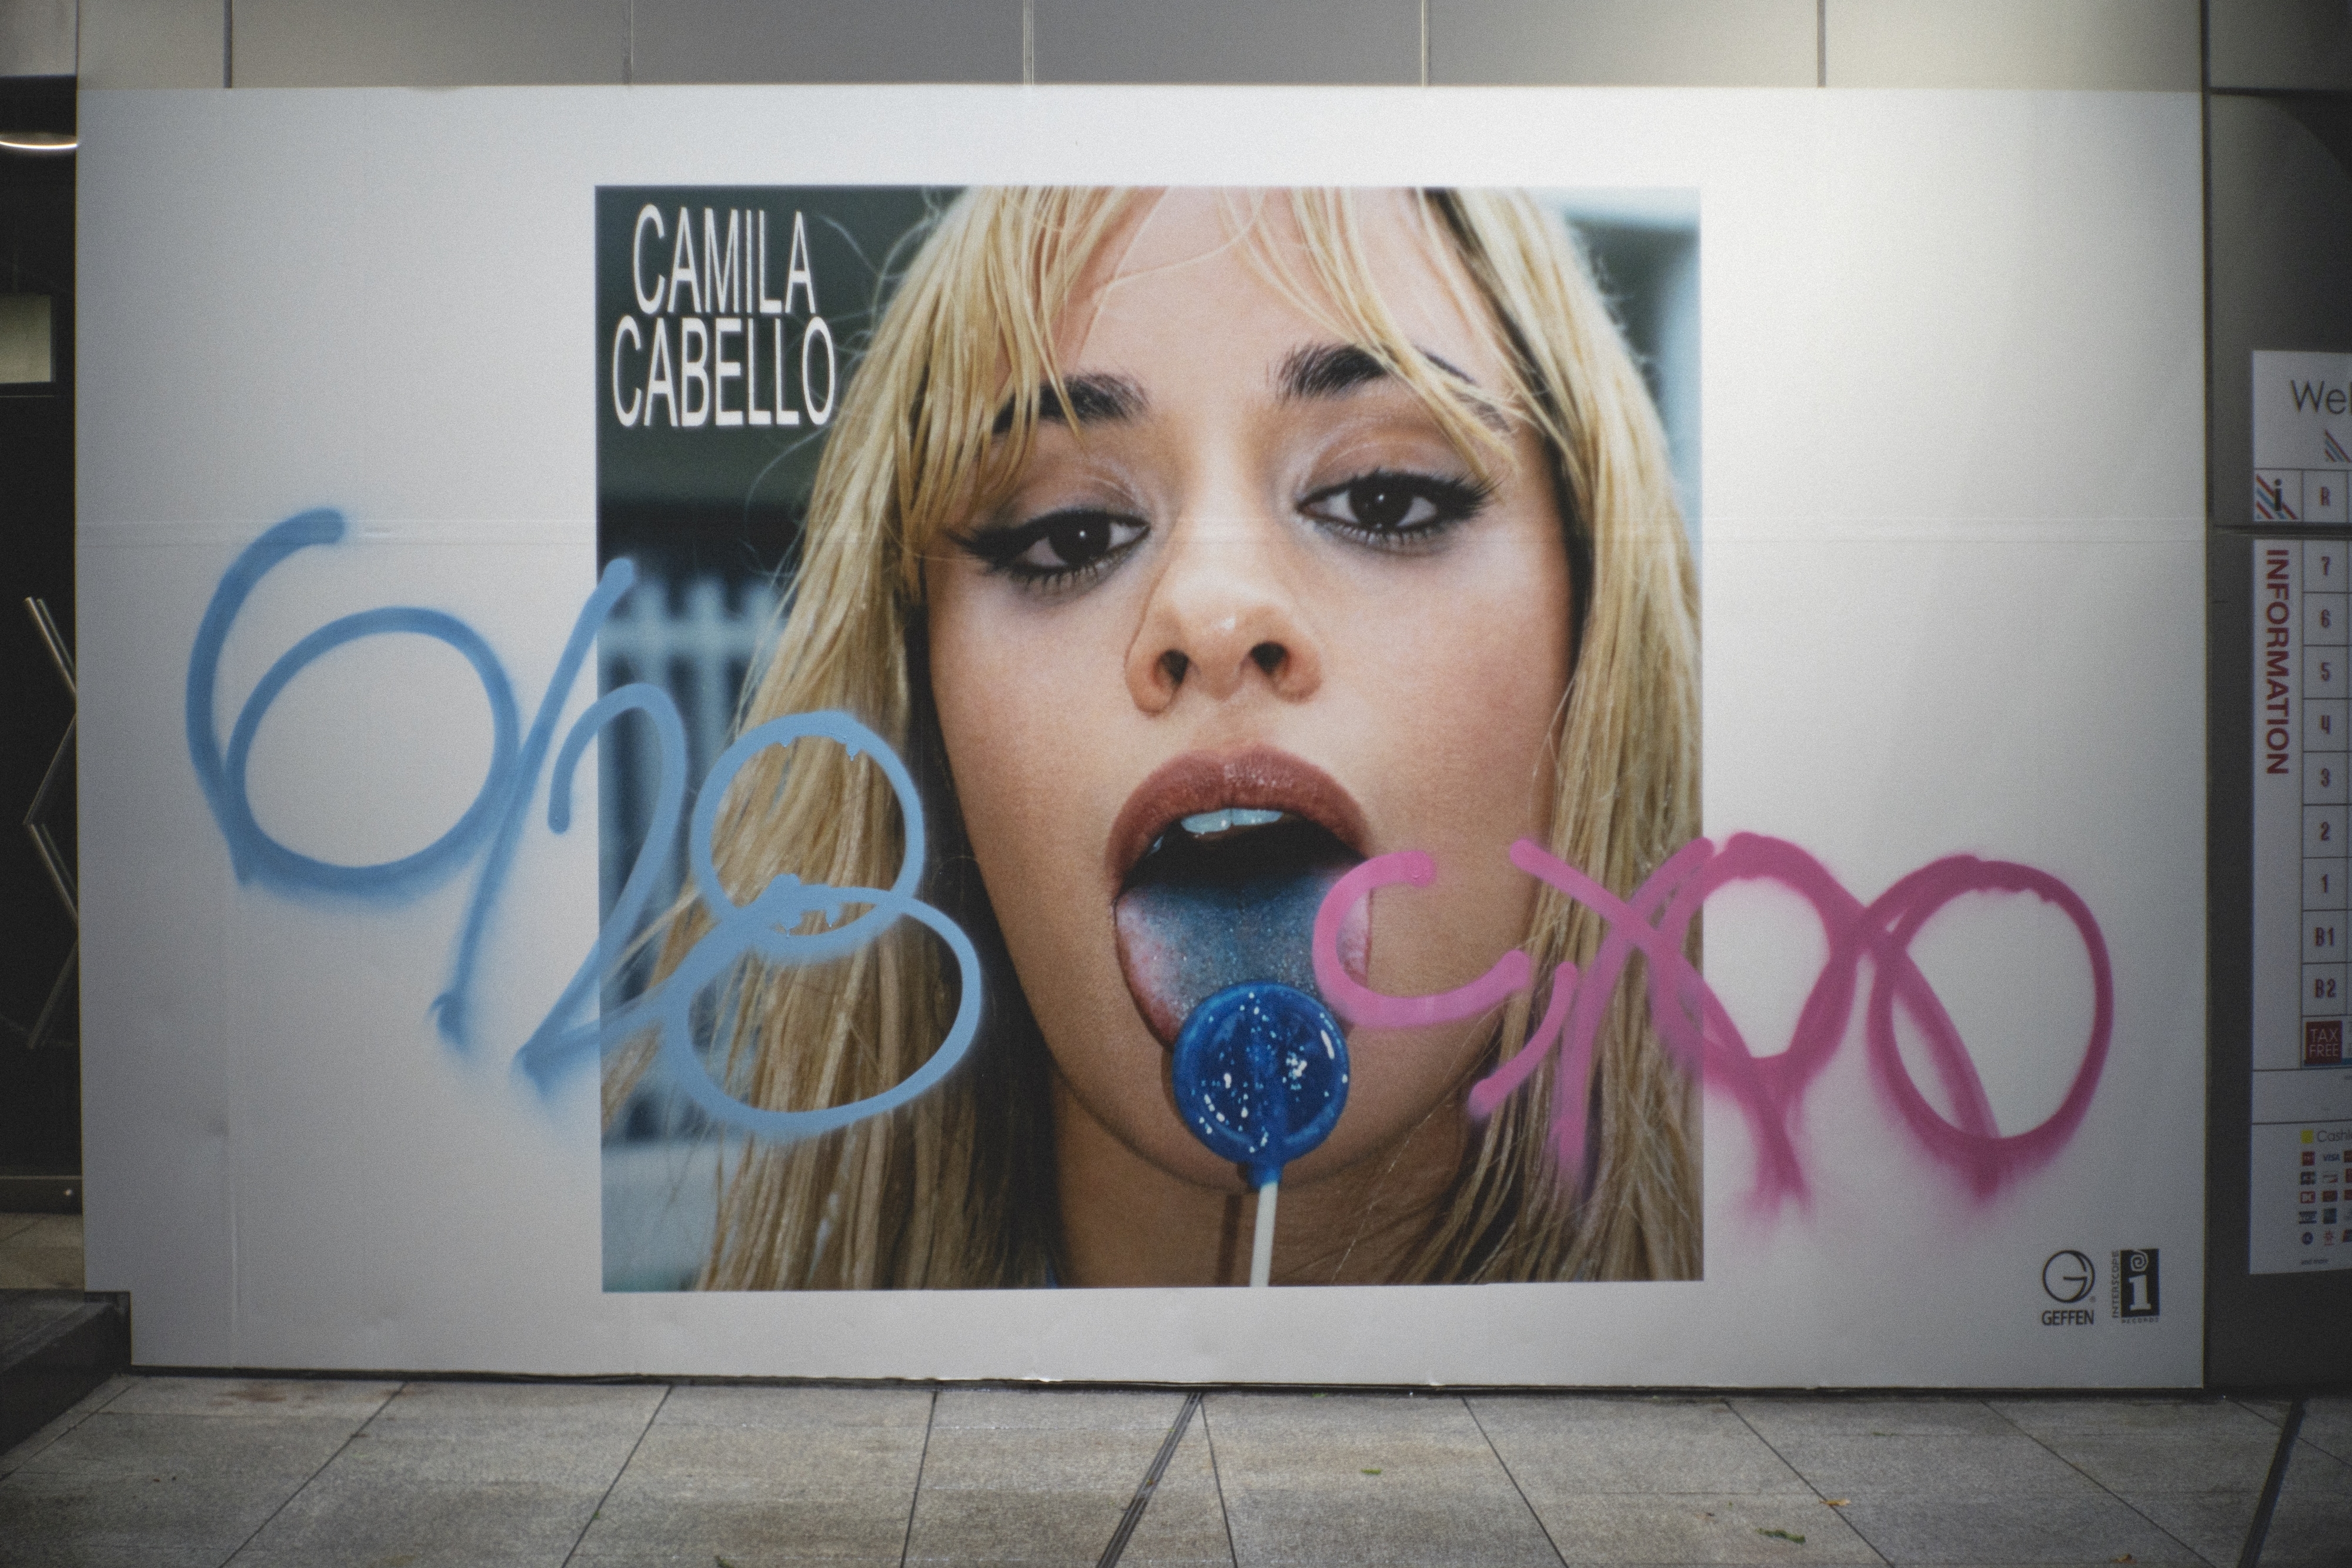 Camila Cabello billboard featuring her licking a blue lollipop, with blue and pink graffiti on the image